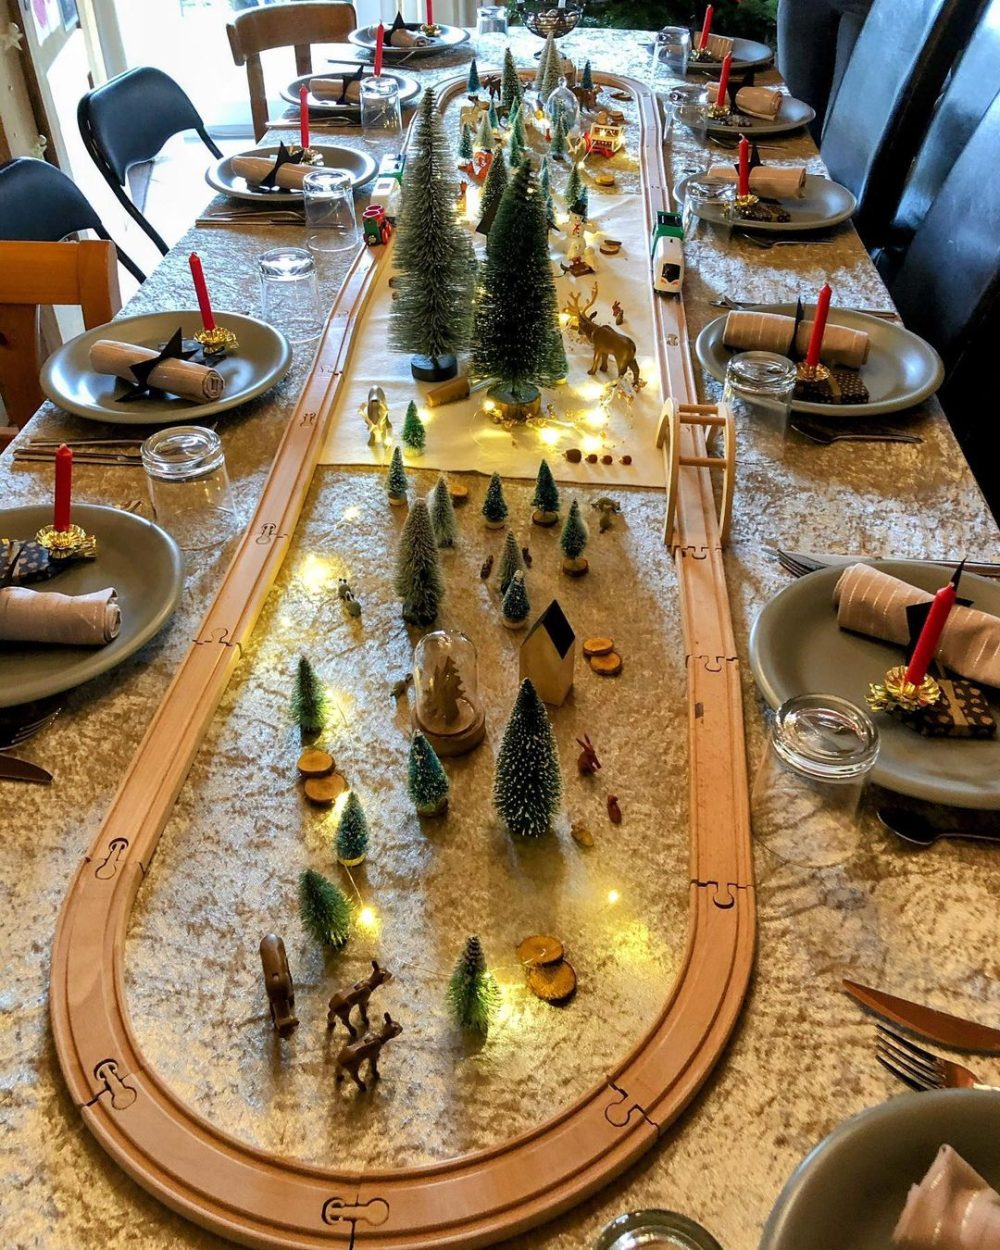 Here Are The Most Beautiful Christmas Table Decorations On Pinterest & Instagram